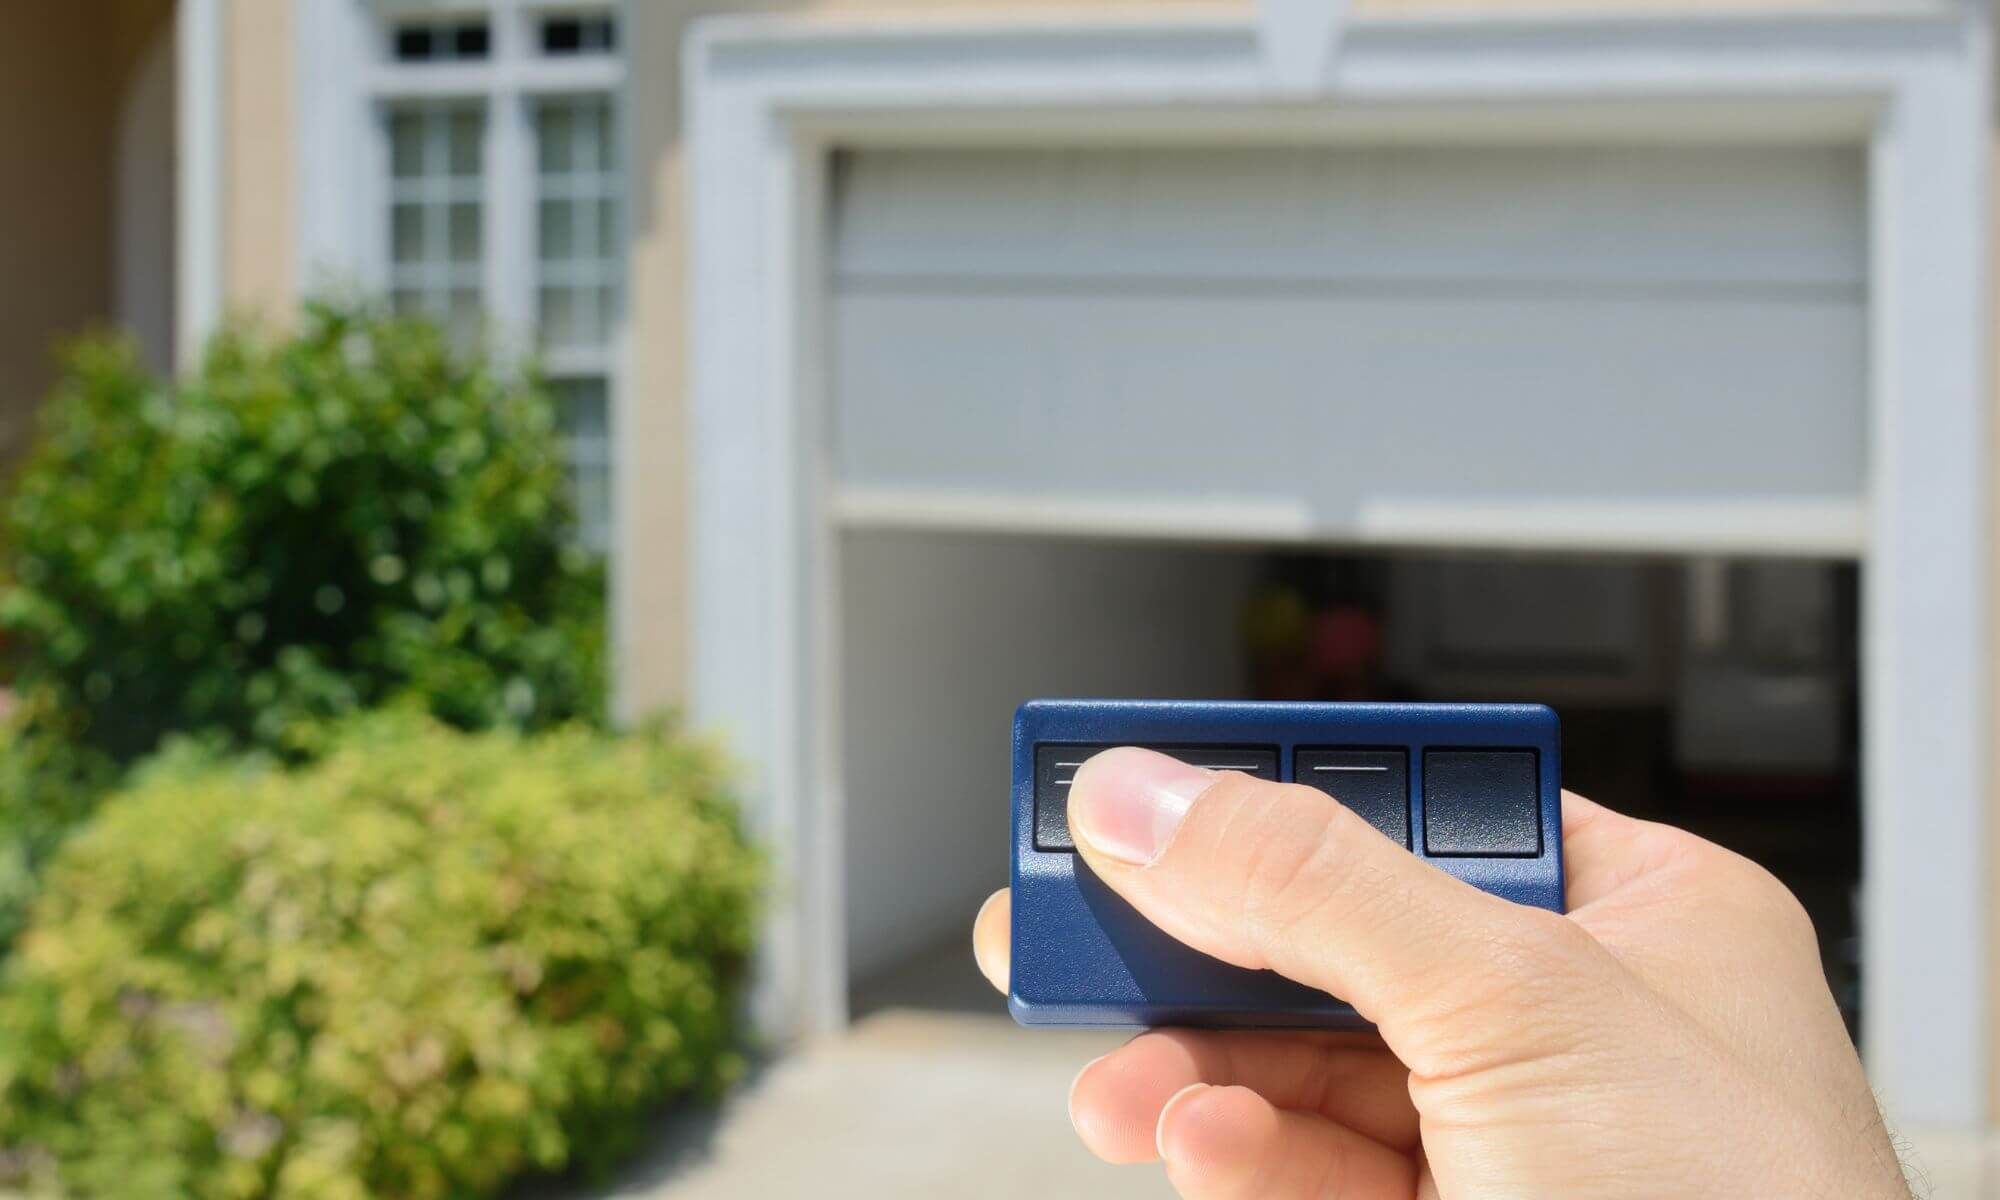 person opening garage with remote